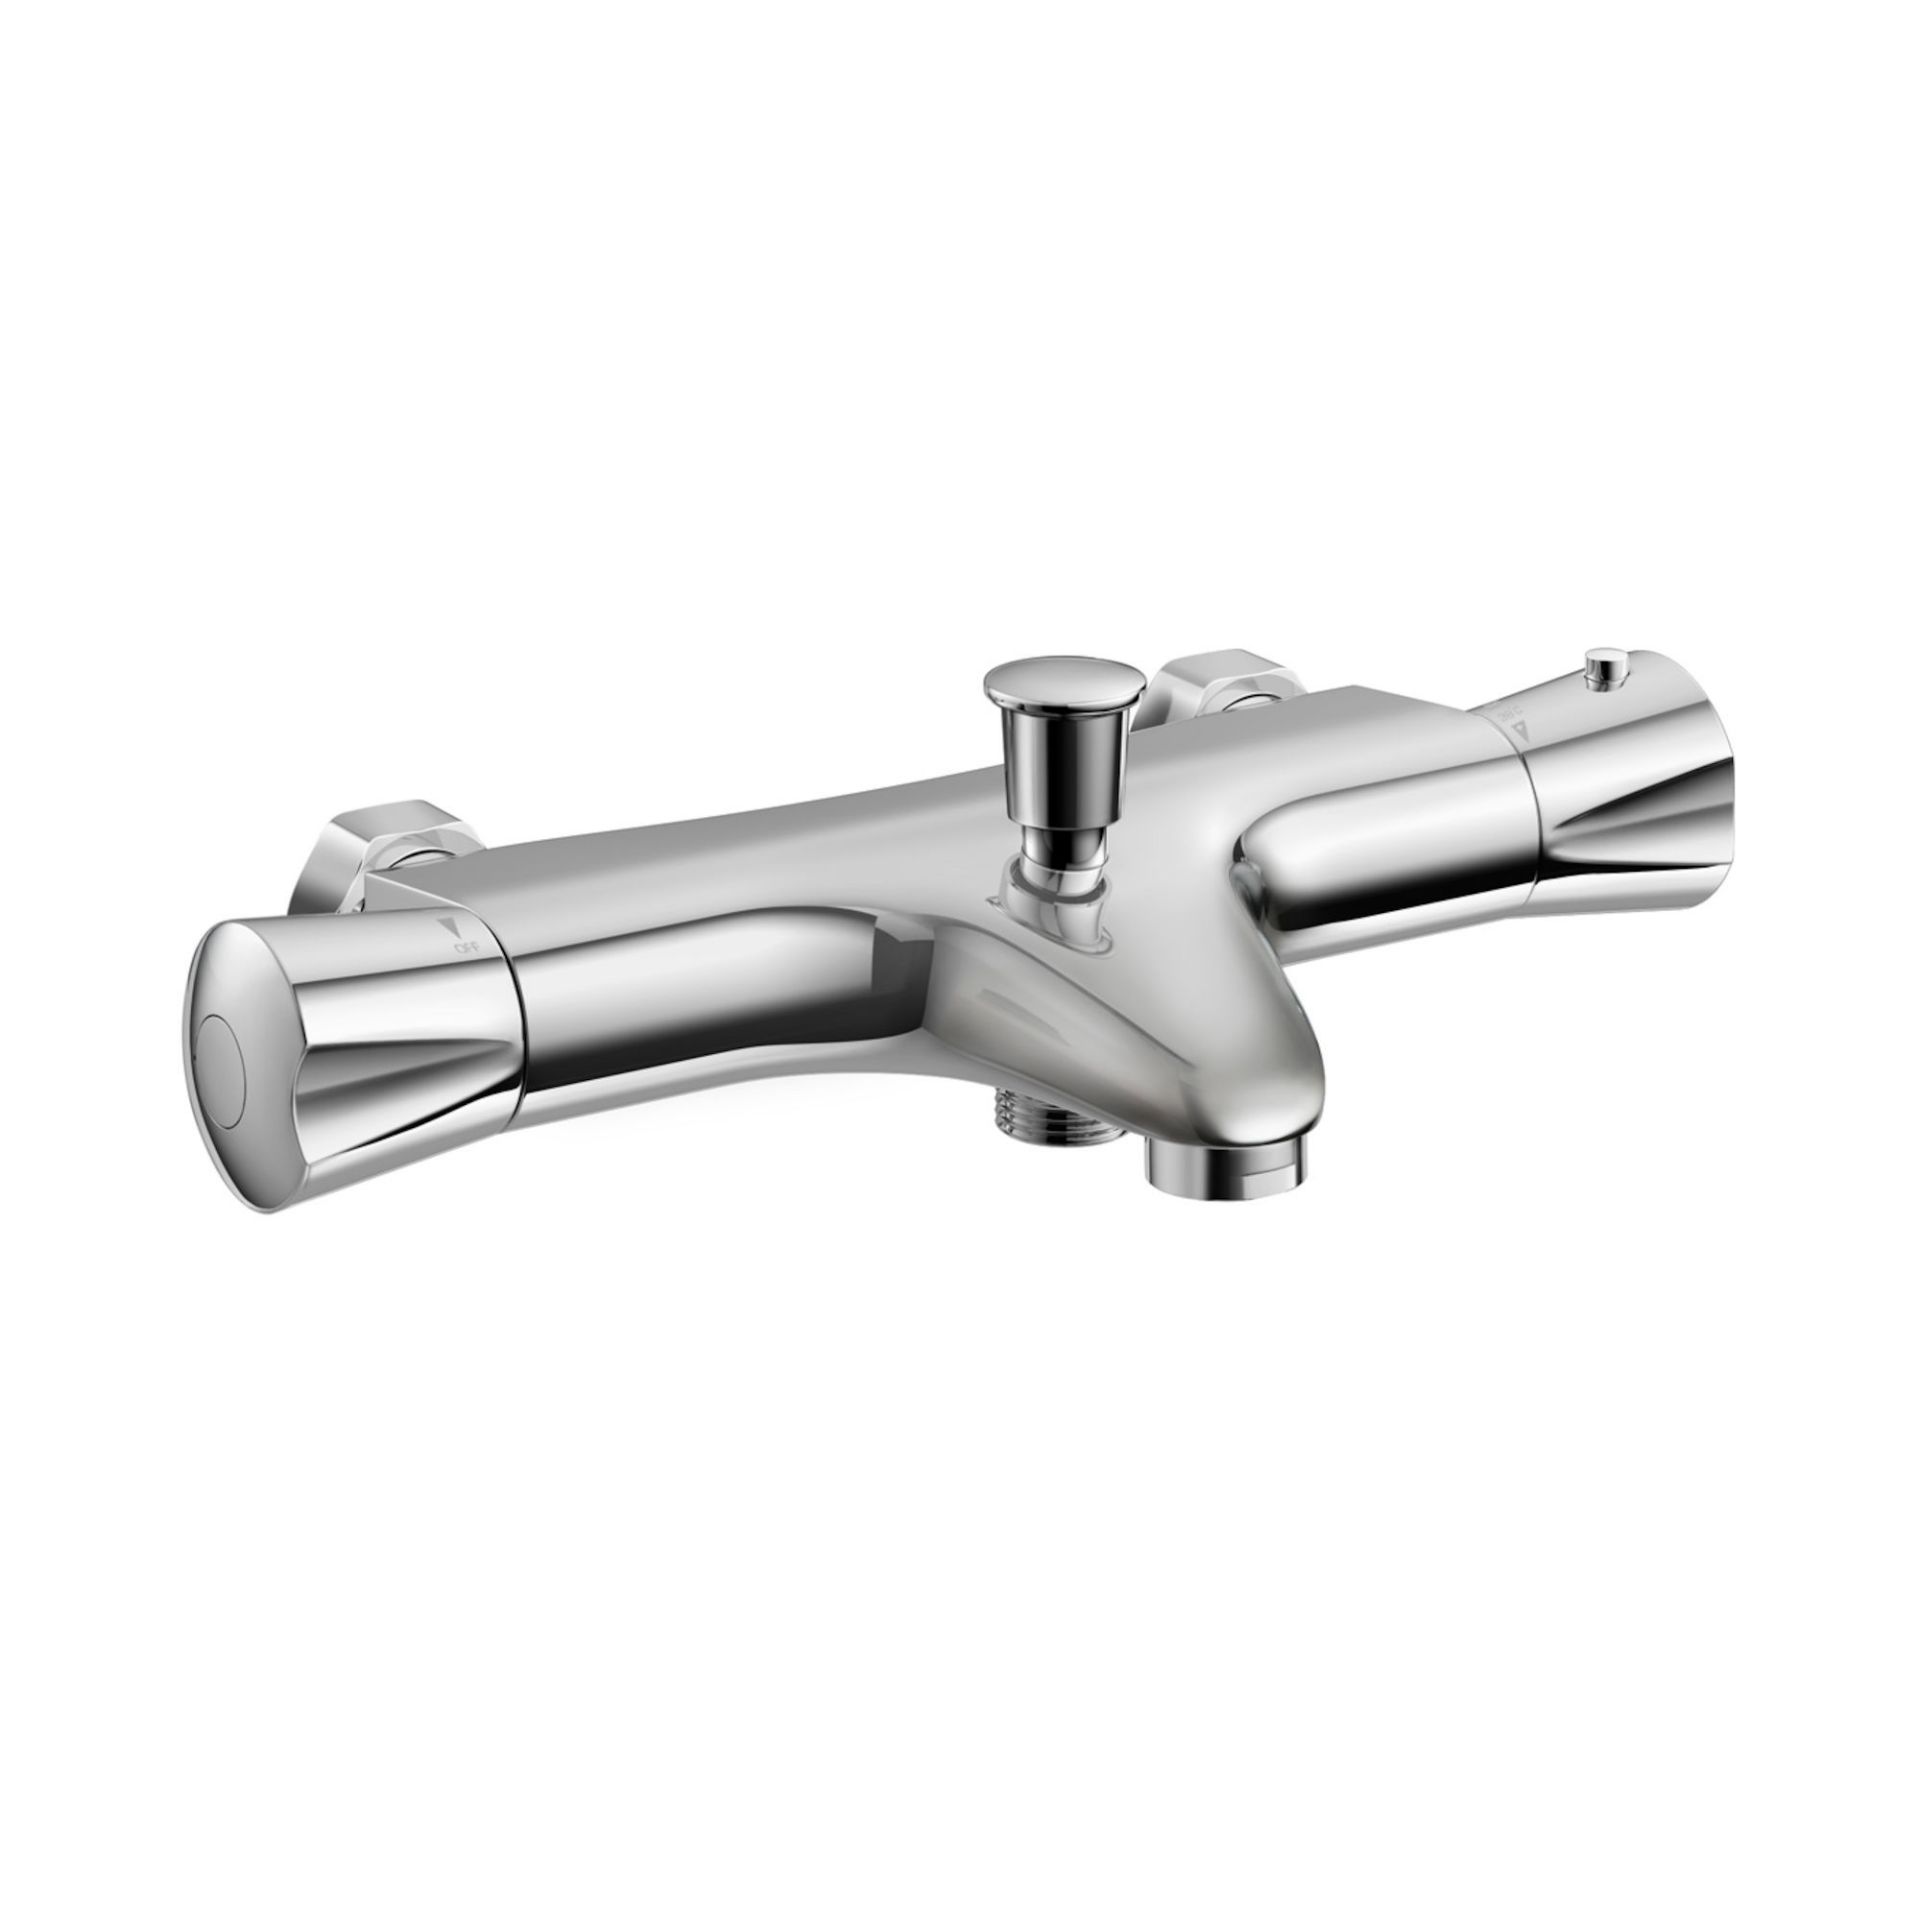 (W40) Shower Mixer Valve with Bath Filler. Chrome Plated Solid Brass Mixer Thermostatic mixer - Image 3 of 3